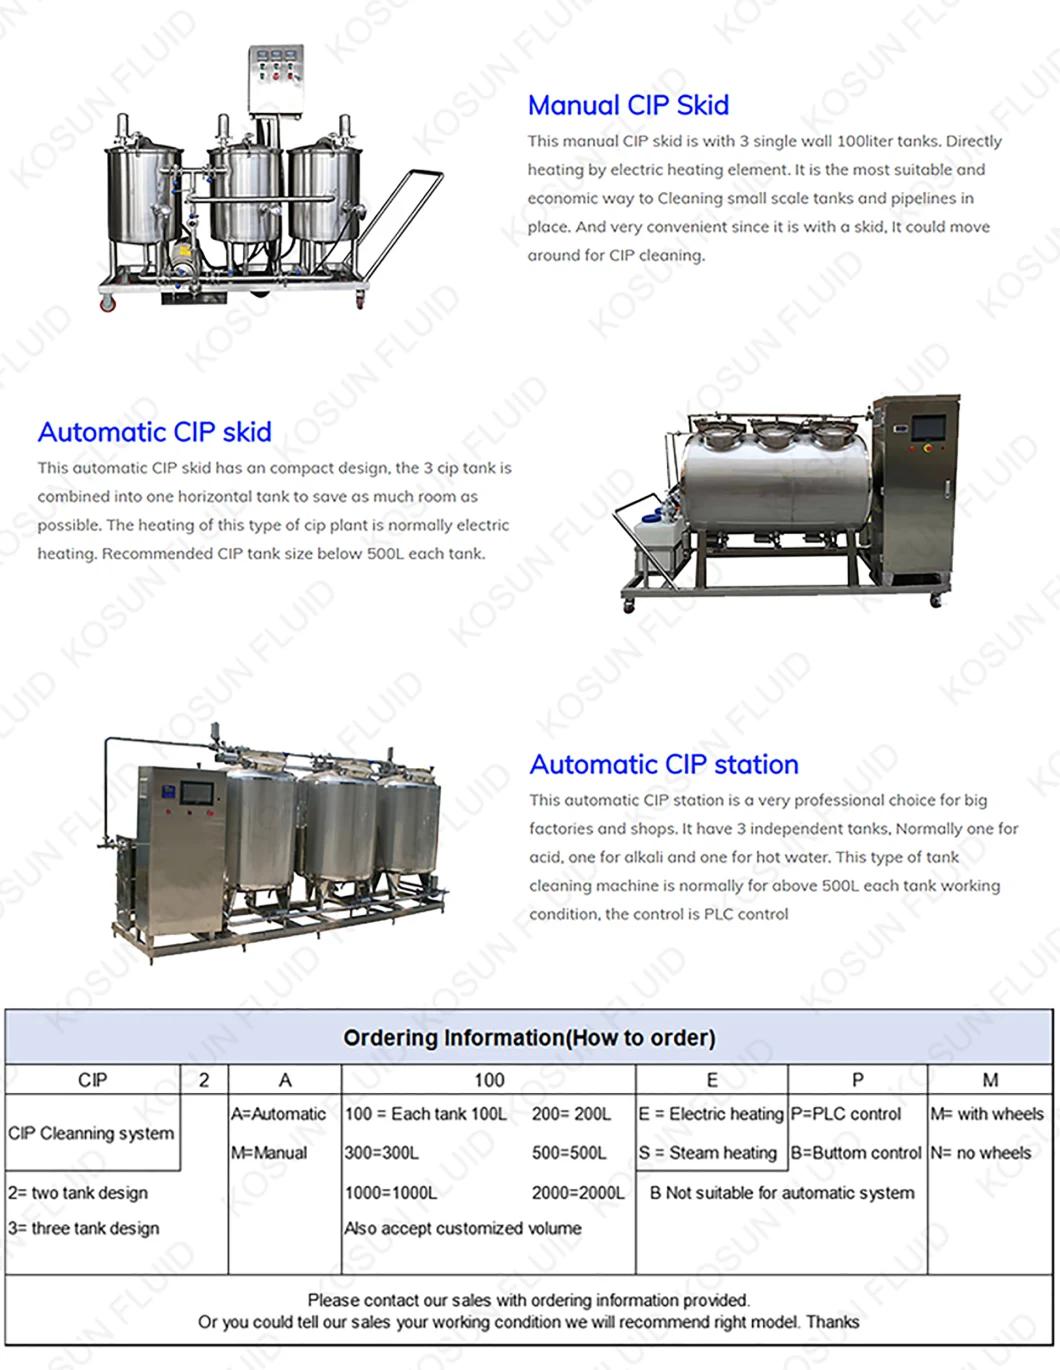 CIP / Machine Cleaning System / Skid